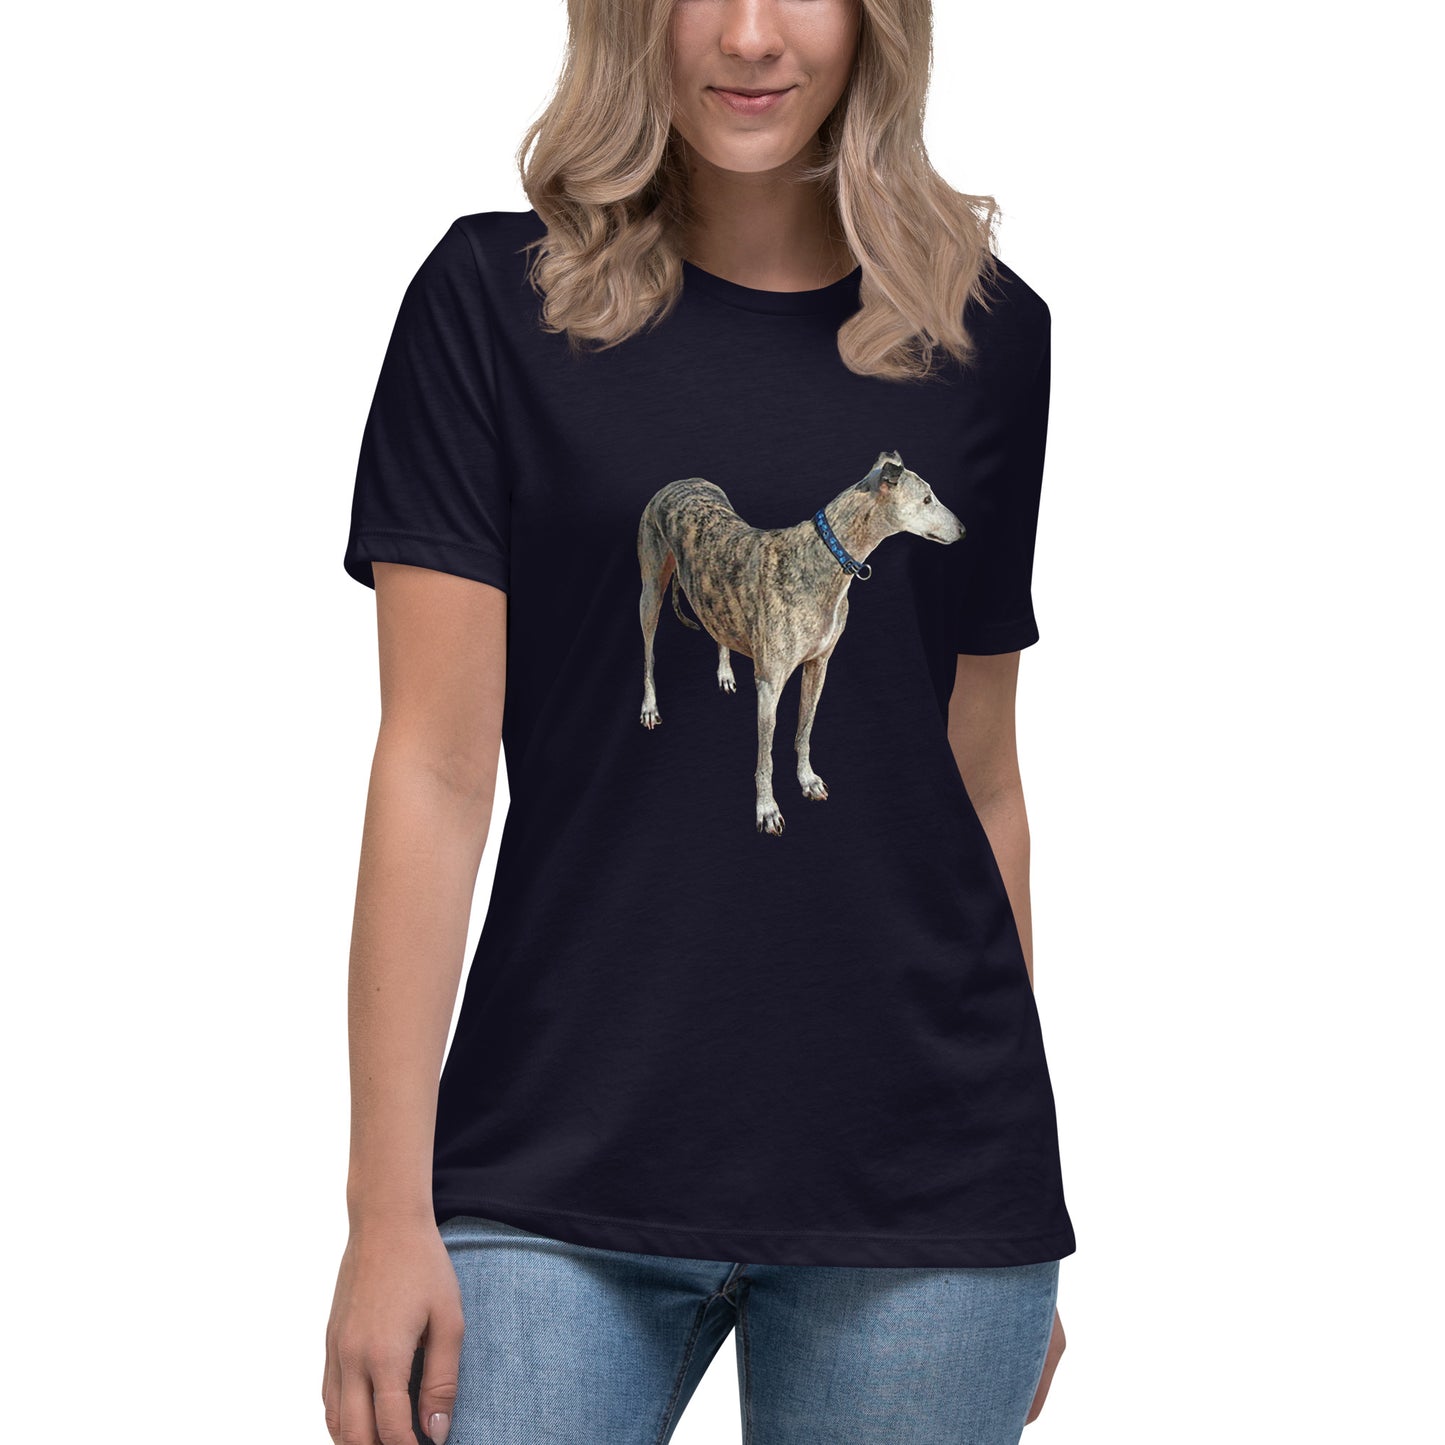 Women's Relaxed T-Shirt printed with a greyhound